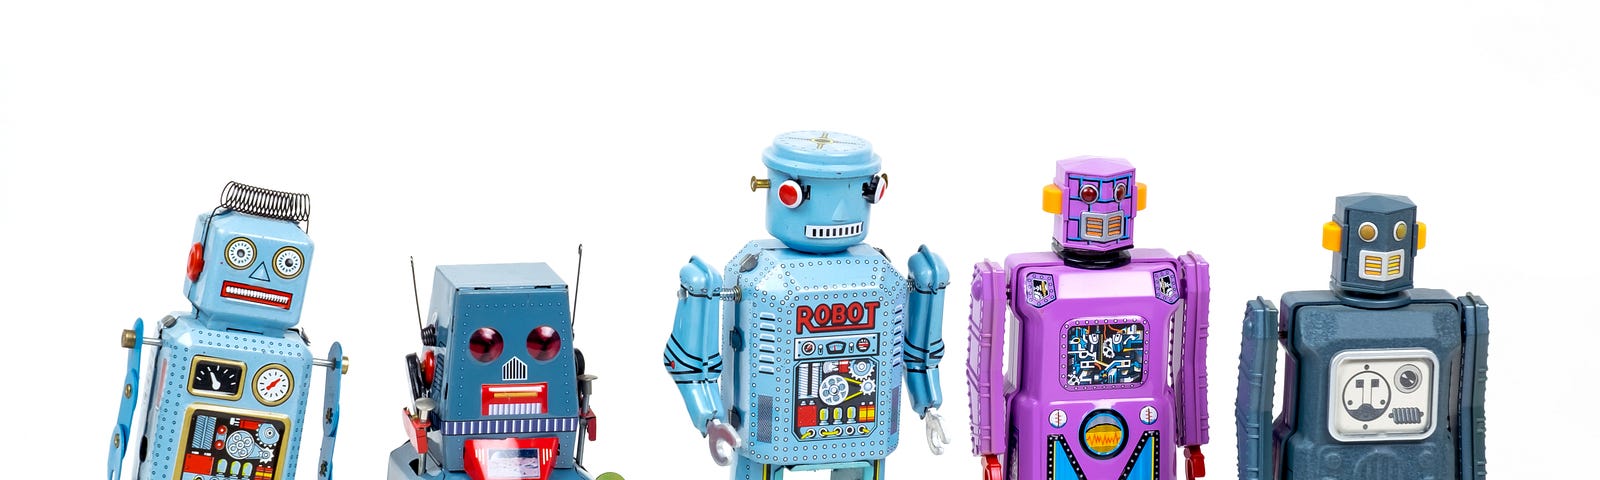 Small robot toys in a line, on a white bacckground, looking stylized and cartoonish in colors ranging from blue-gray to purple